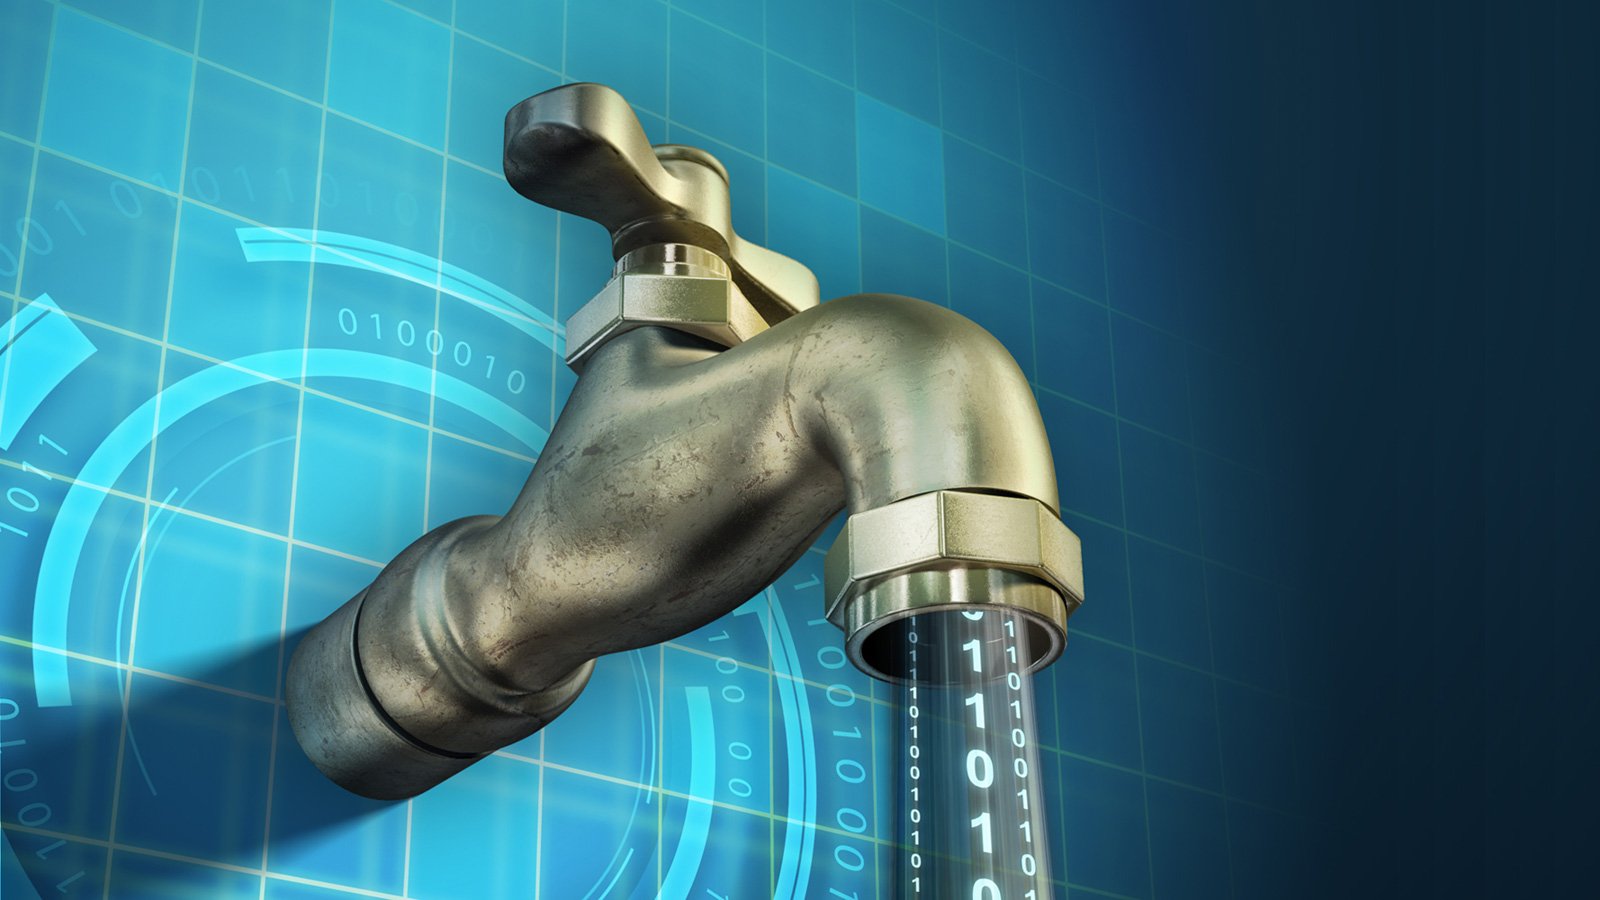 An image of a water tap with a blue background for Cybersecurity Solutions.